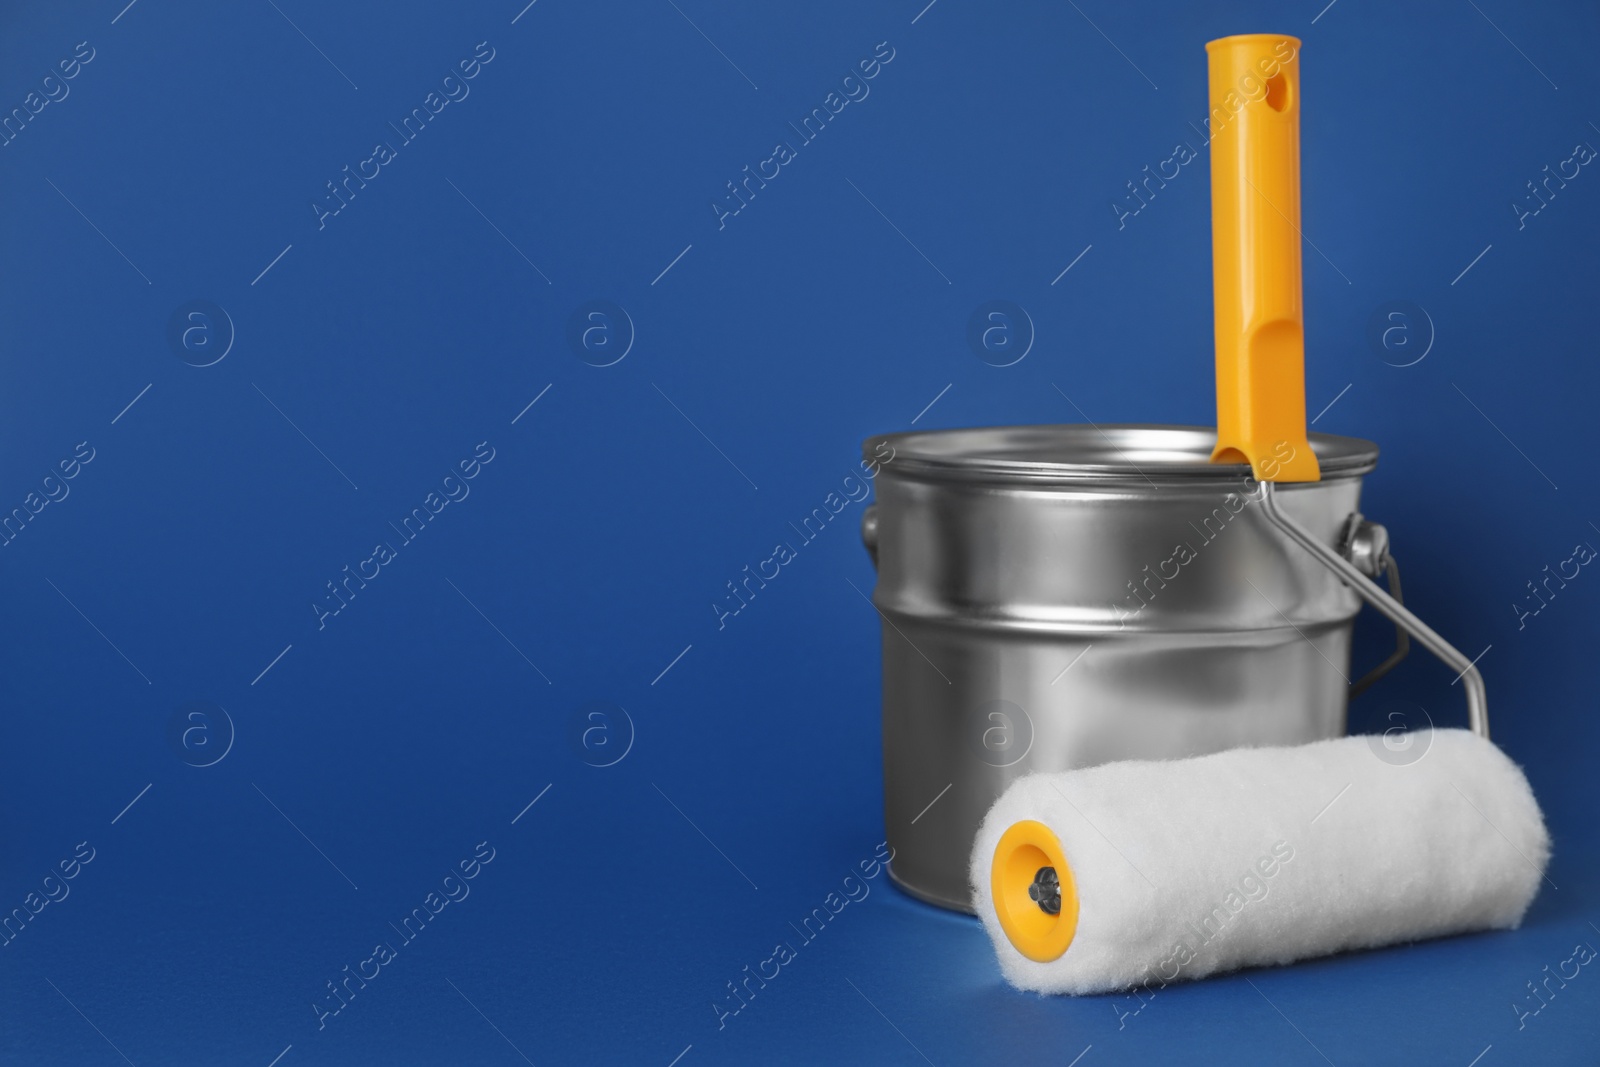 Photo of Can of paint and roller brush on blue background. Space for text